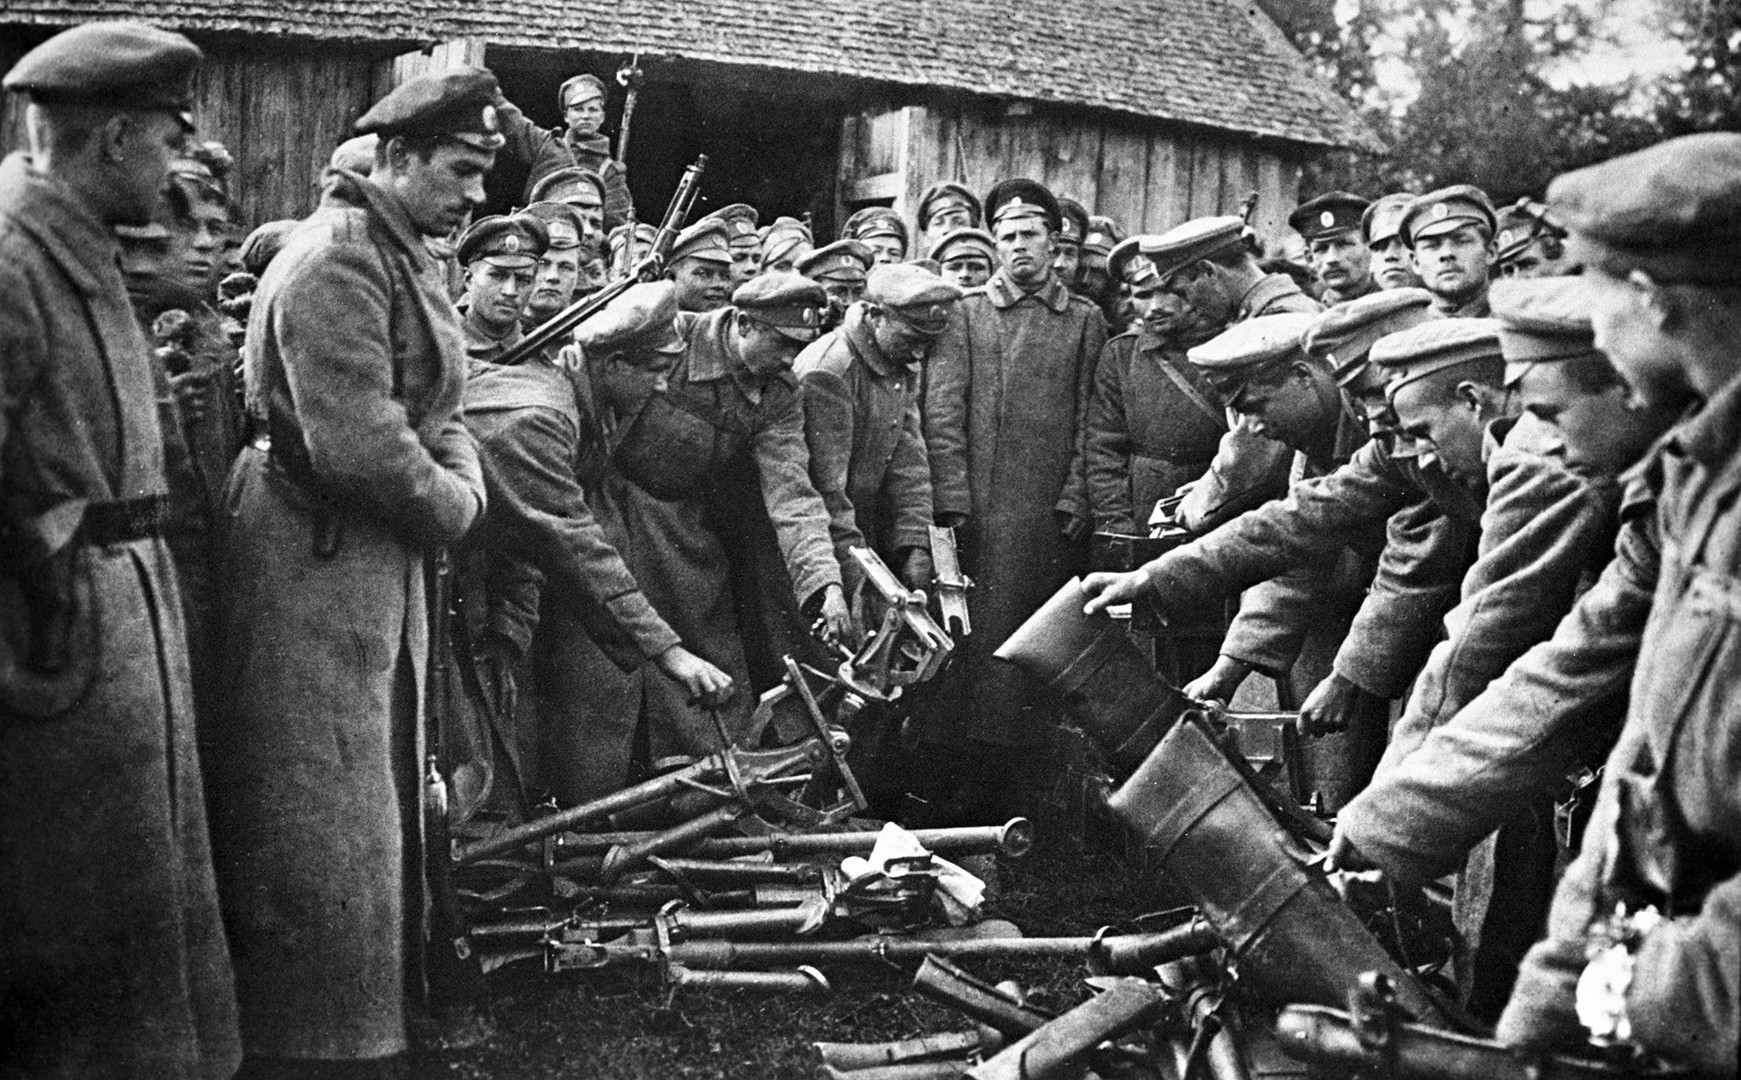 General Kornilov's army soldiers are surrendering their weapons.